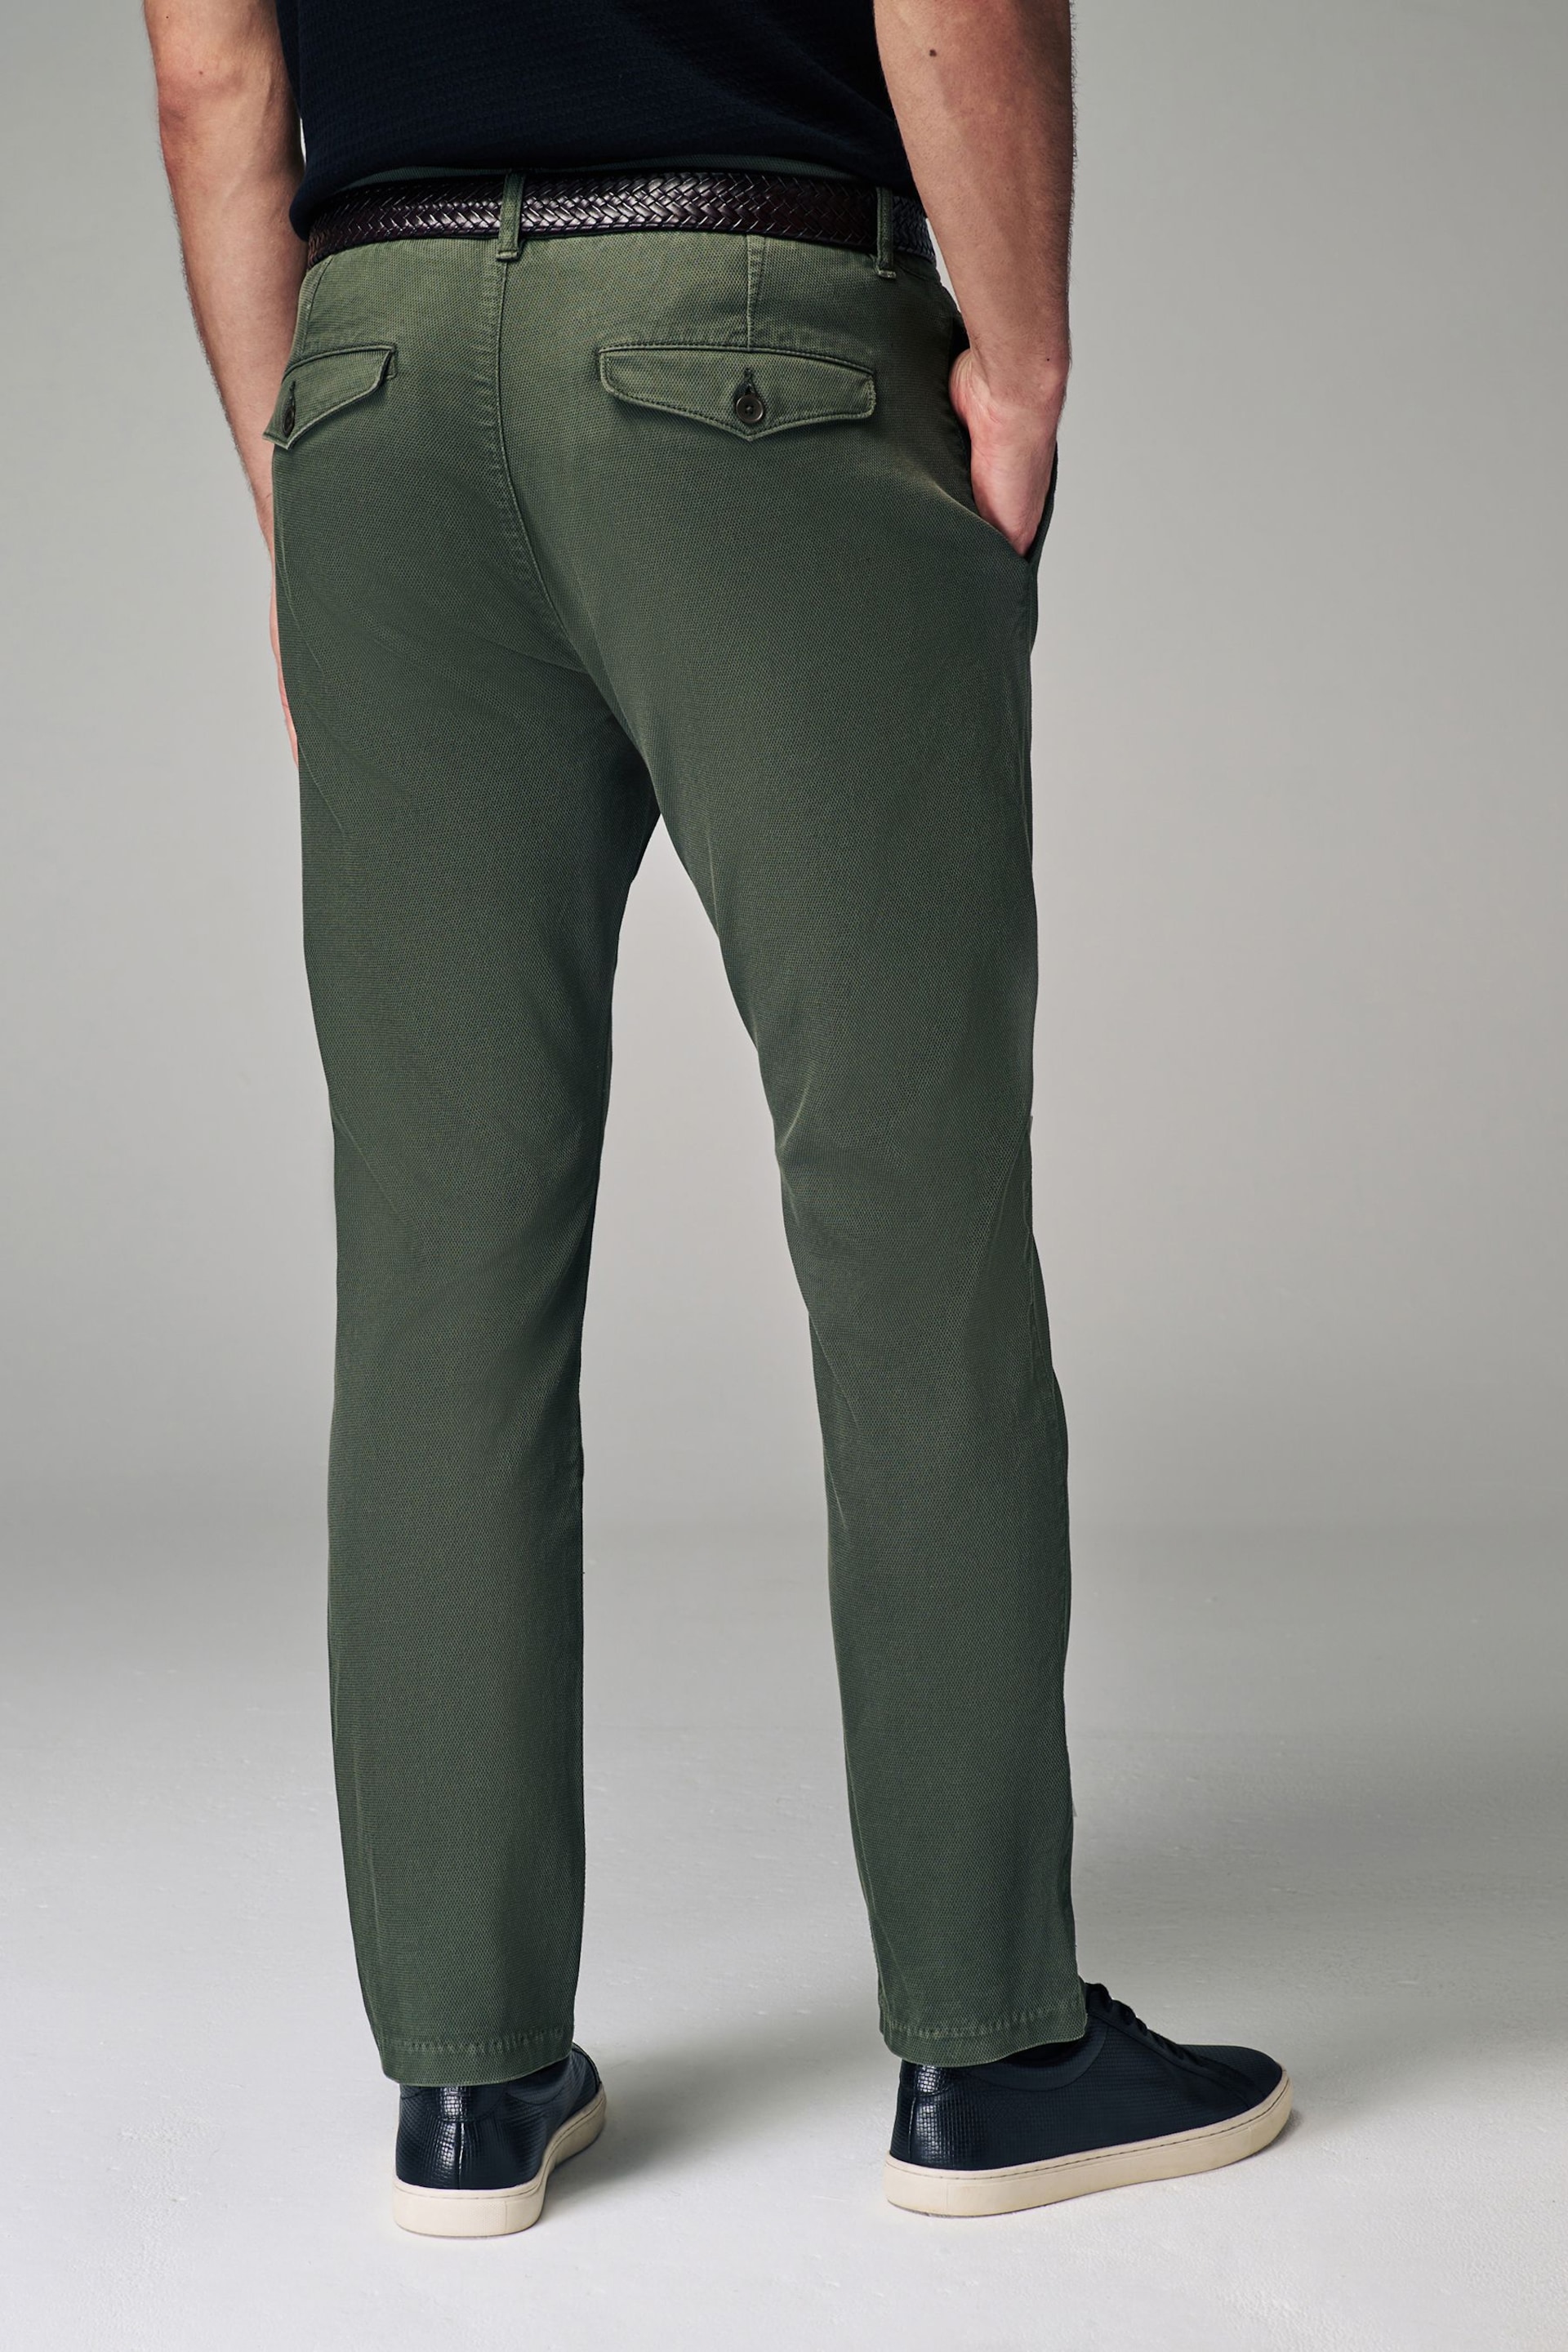 Green Slim Fit Textured Belted Trousers - Image 4 of 9